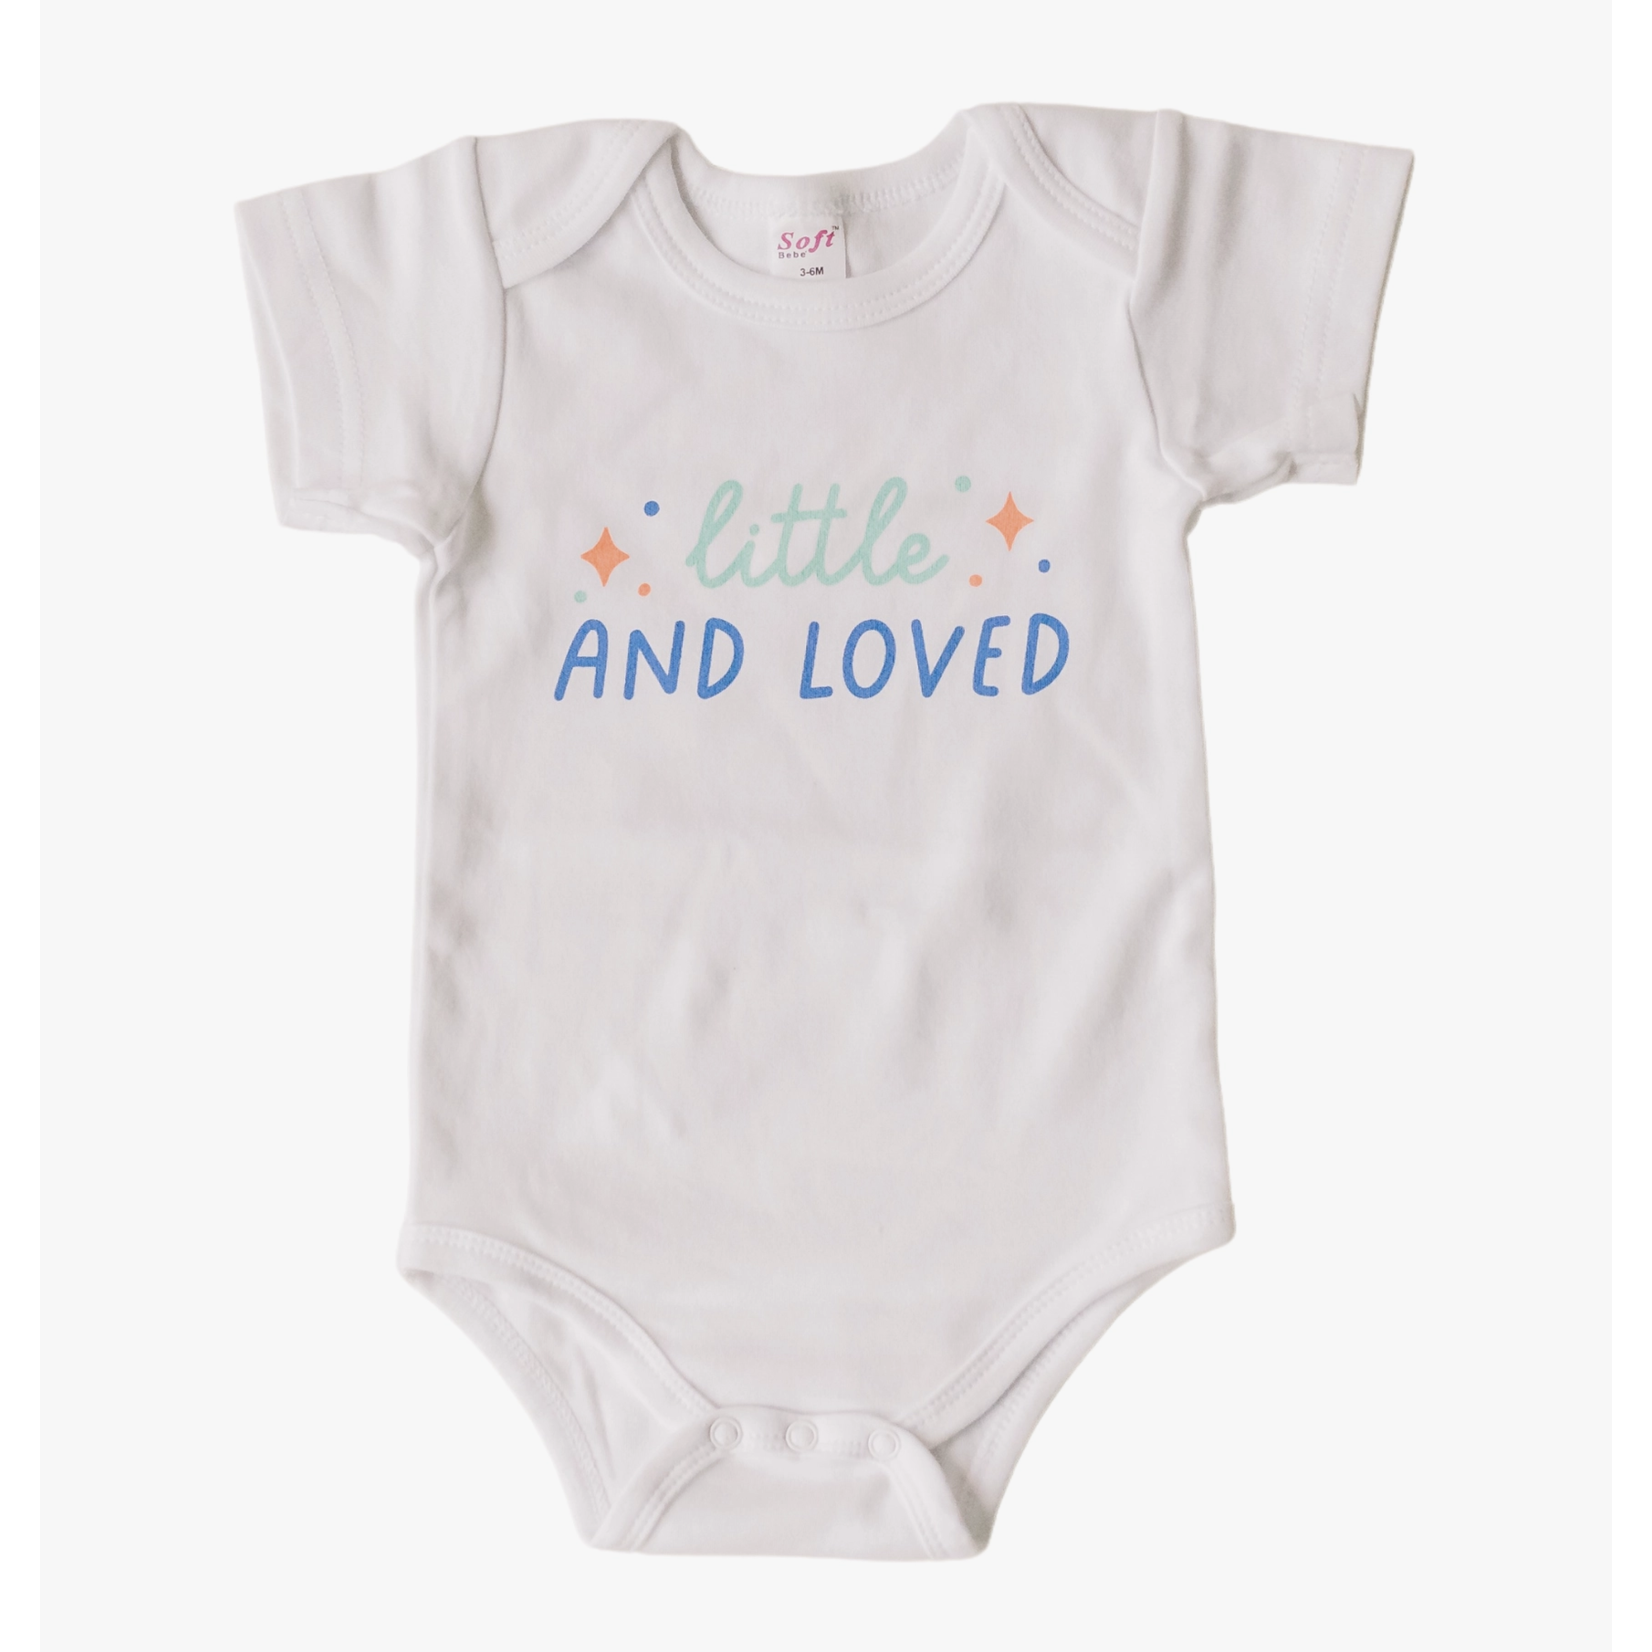 Sweetpea and Co Little and Loved Baby Onesie